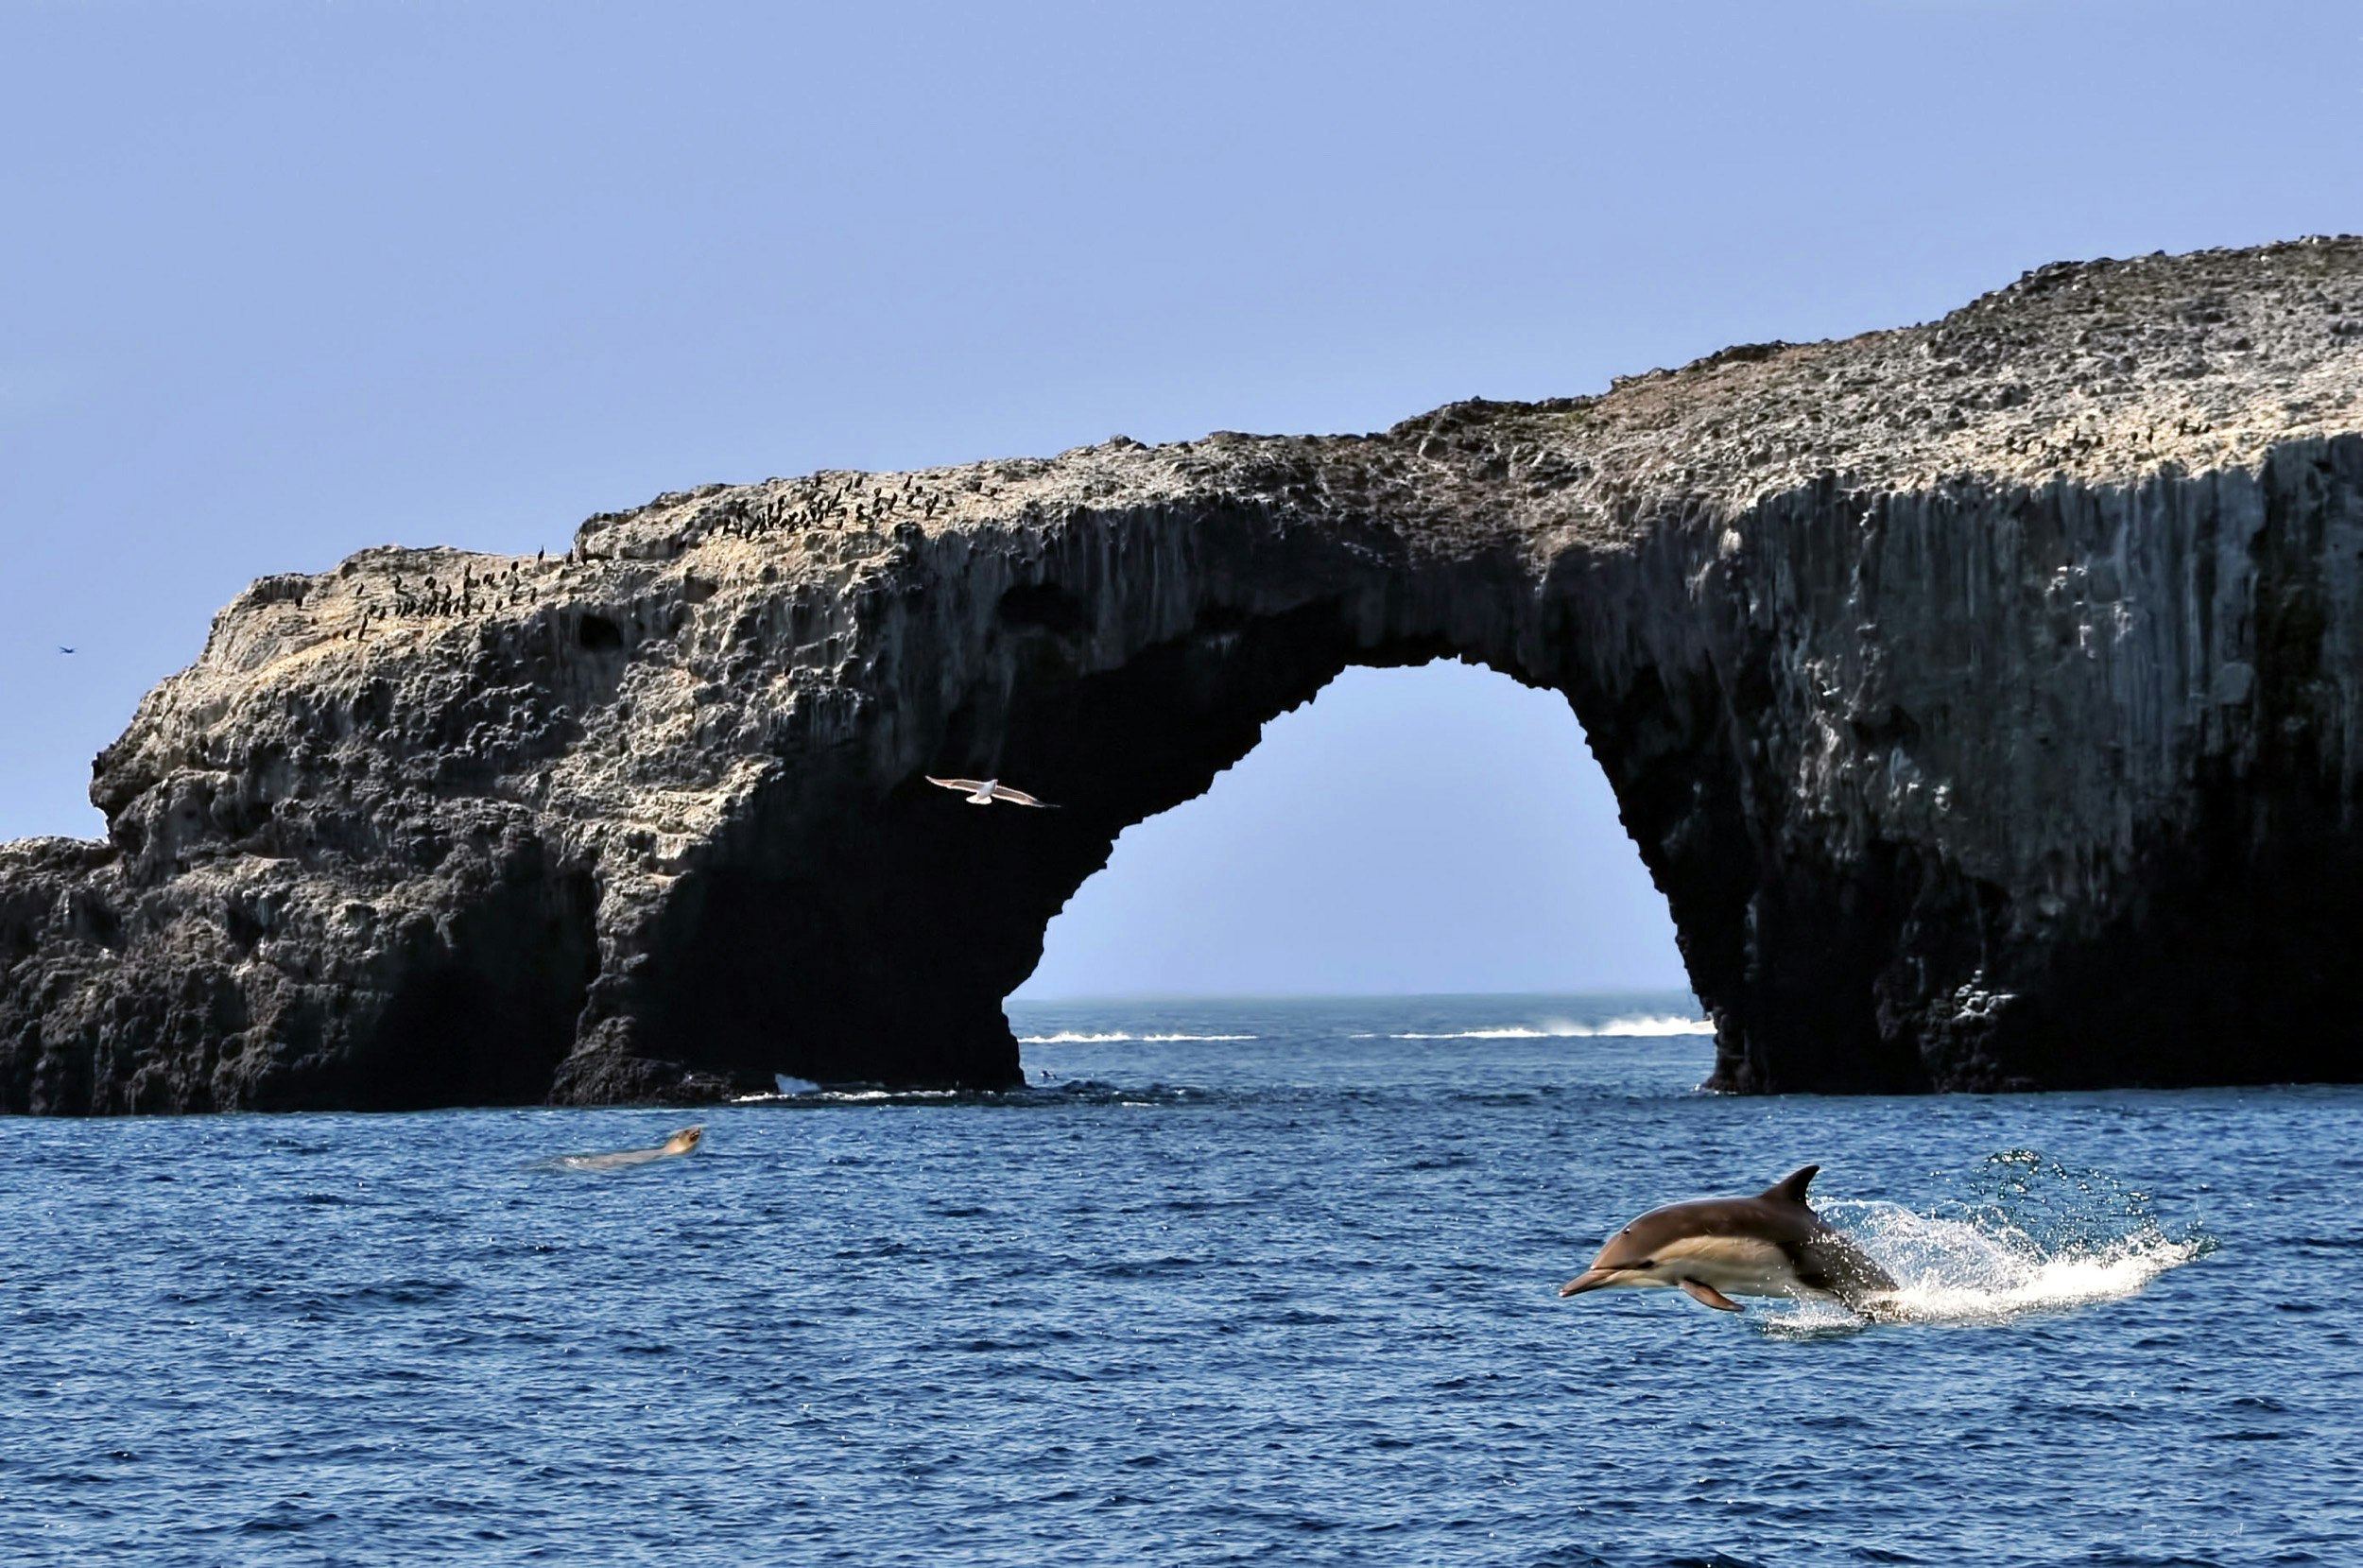 A dolphin and a sea lion swim in front of a stone archway reaching out into the water at Channel Islands National Park